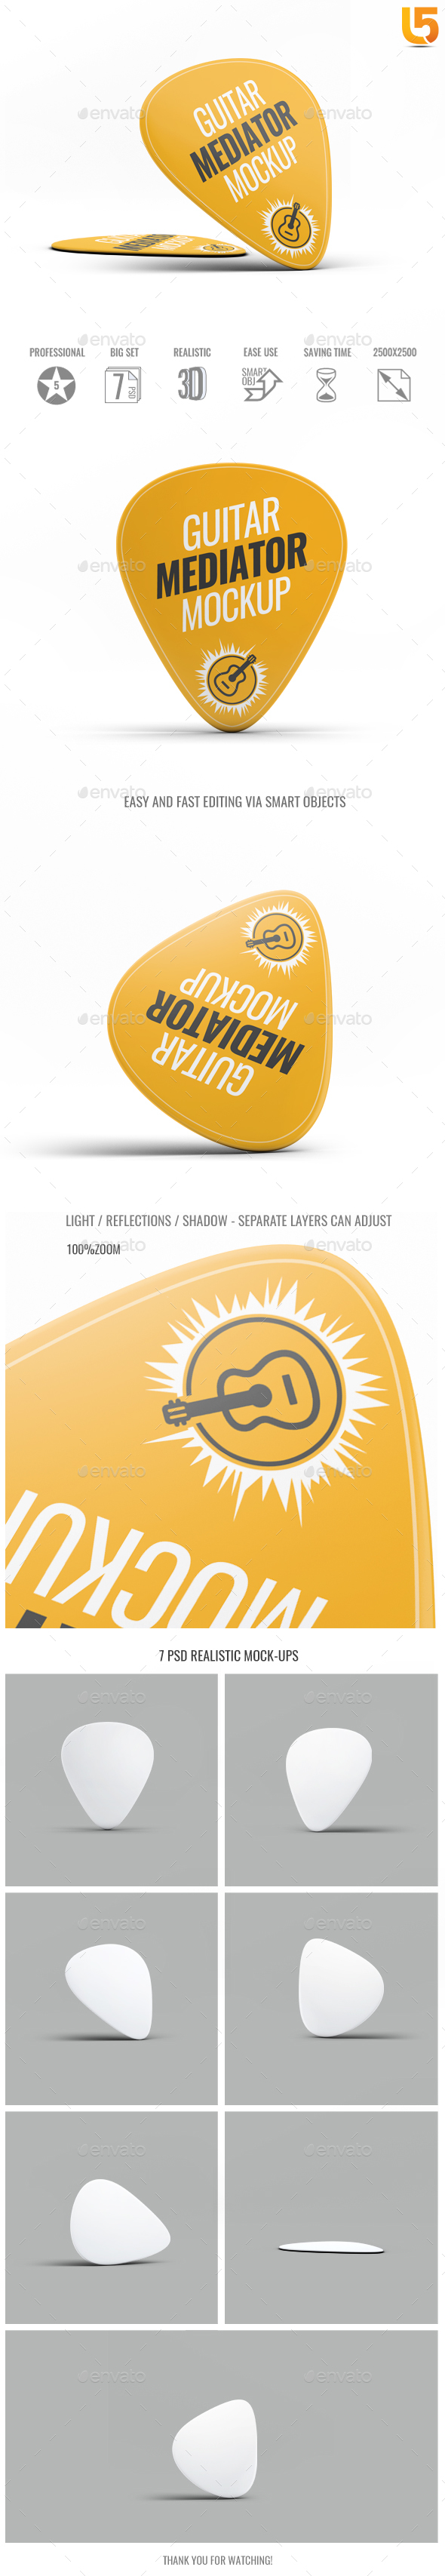 Download Guitar Mockup Graphics Designs Templates From Graphicriver